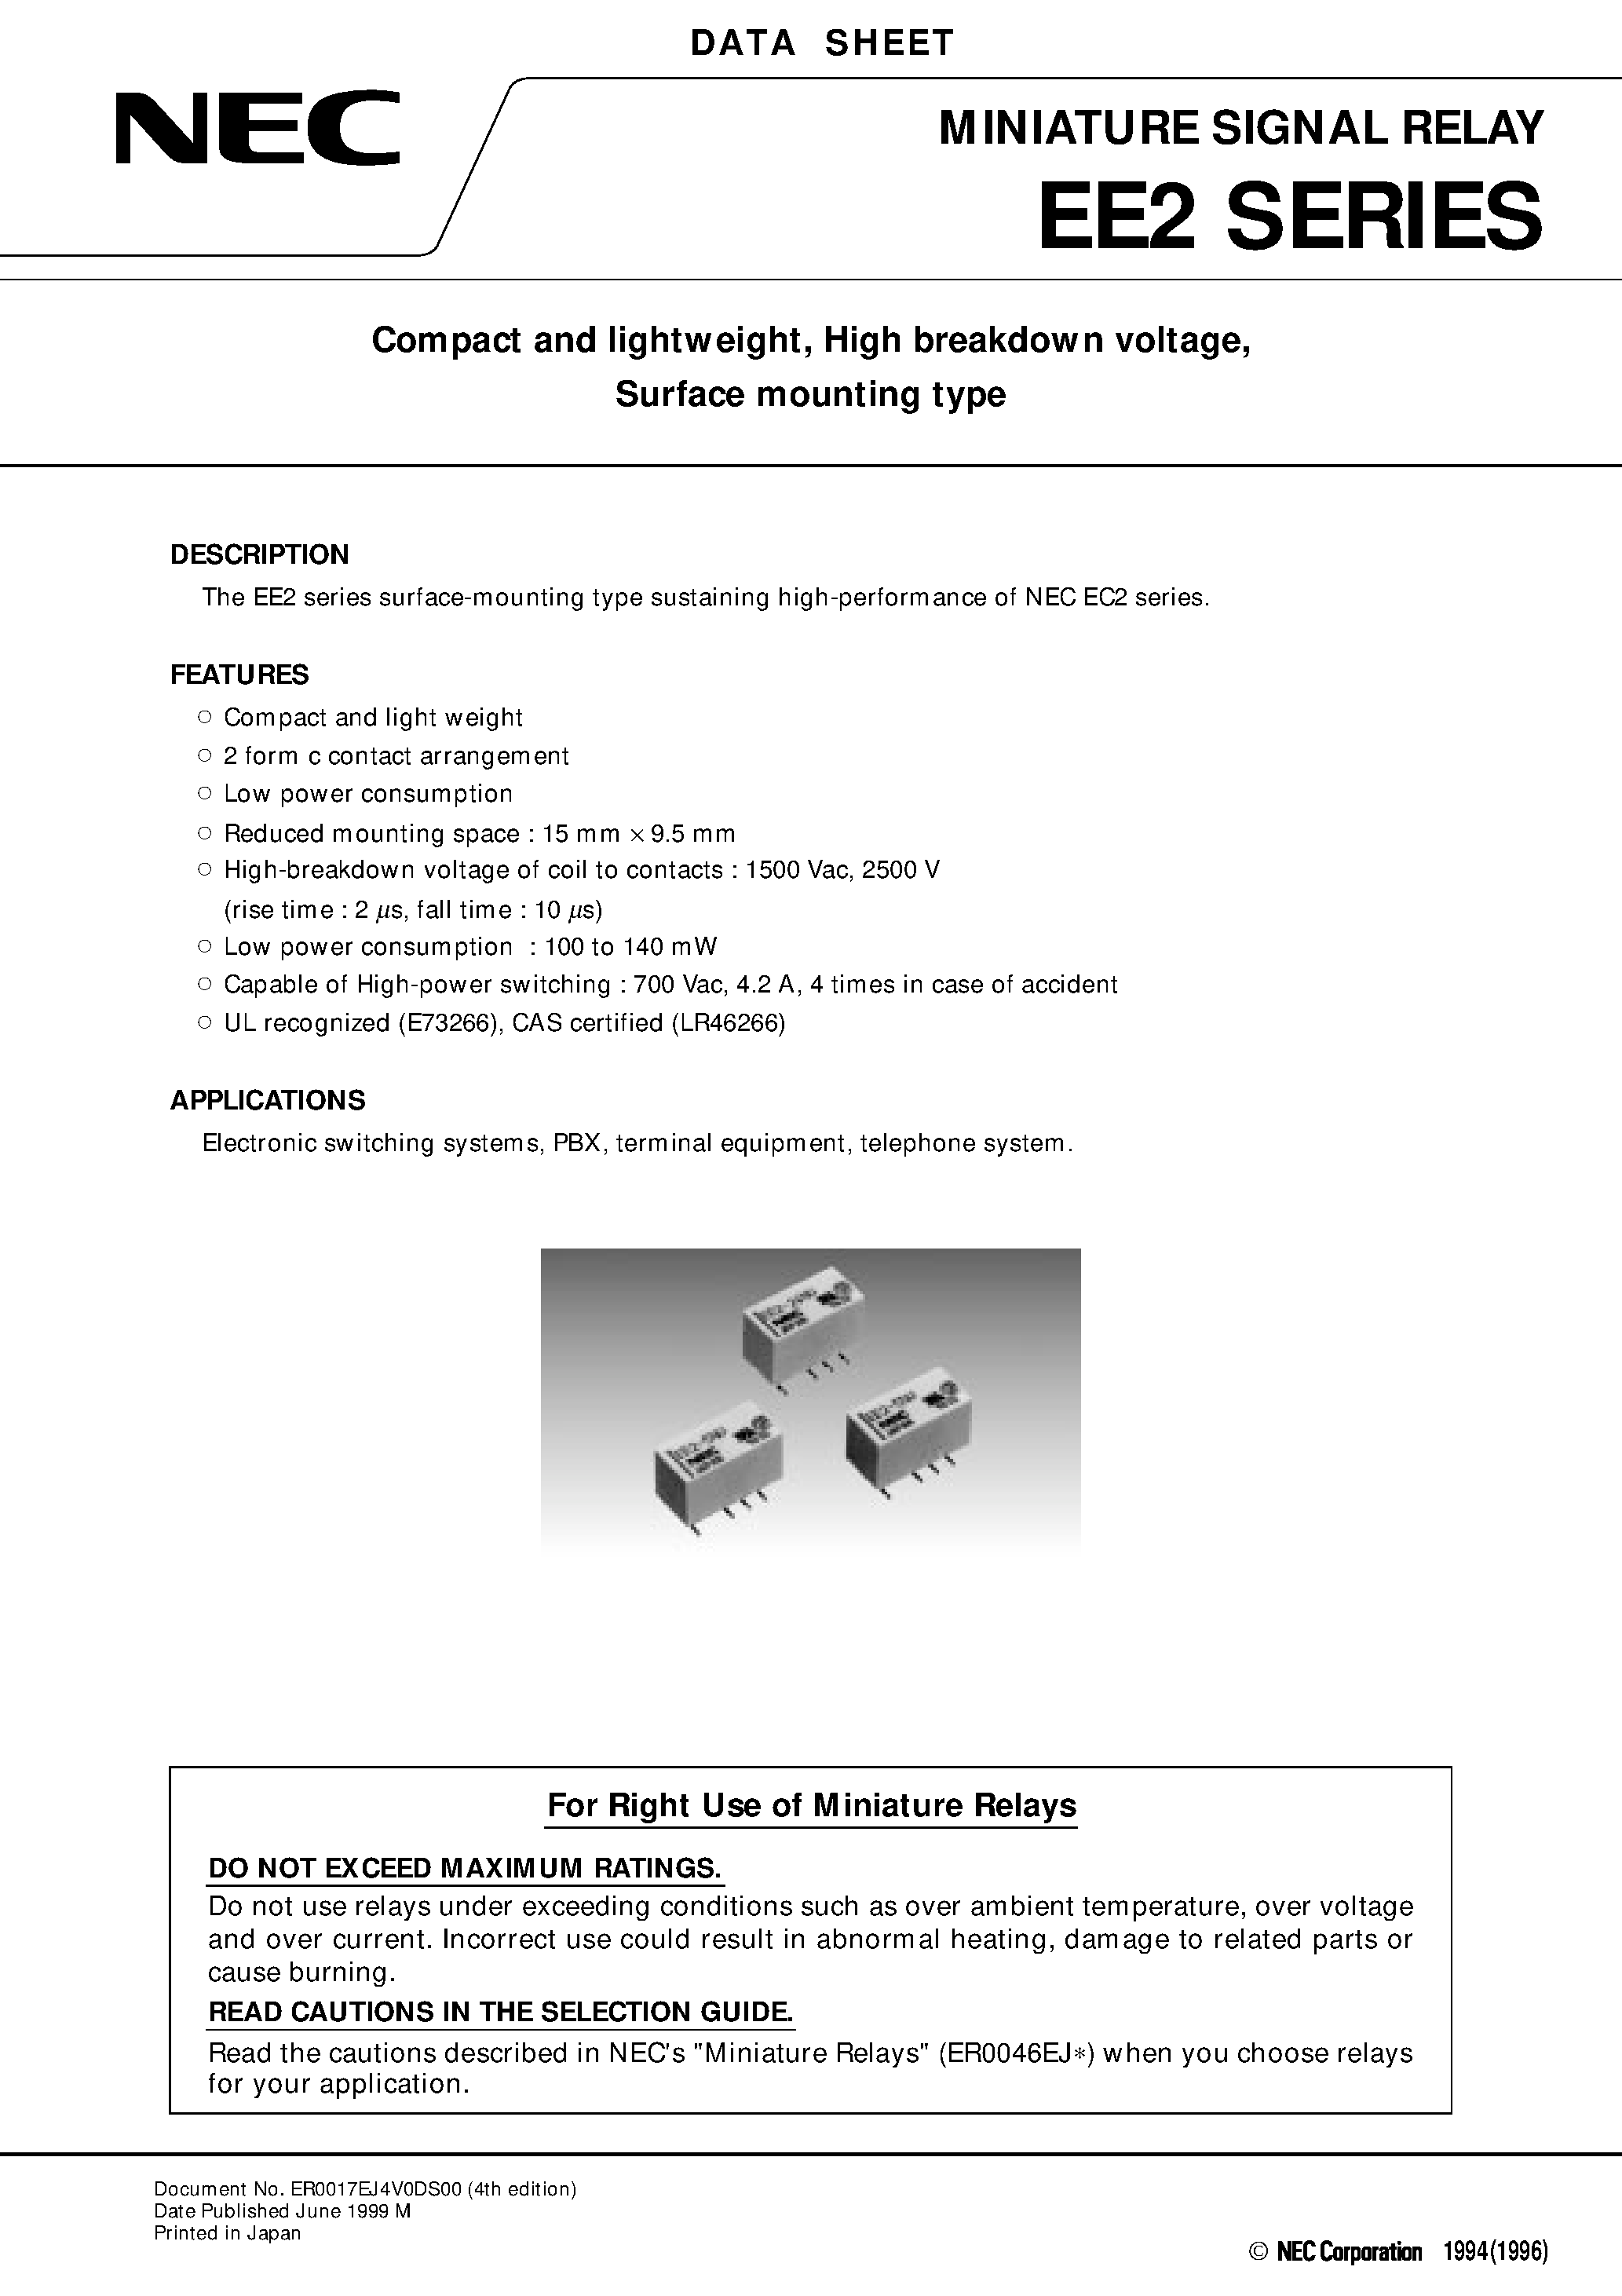 Datasheet EE2-9 - Compact and lightweight/ High breakdown voltage/ Surface mounting type page 1